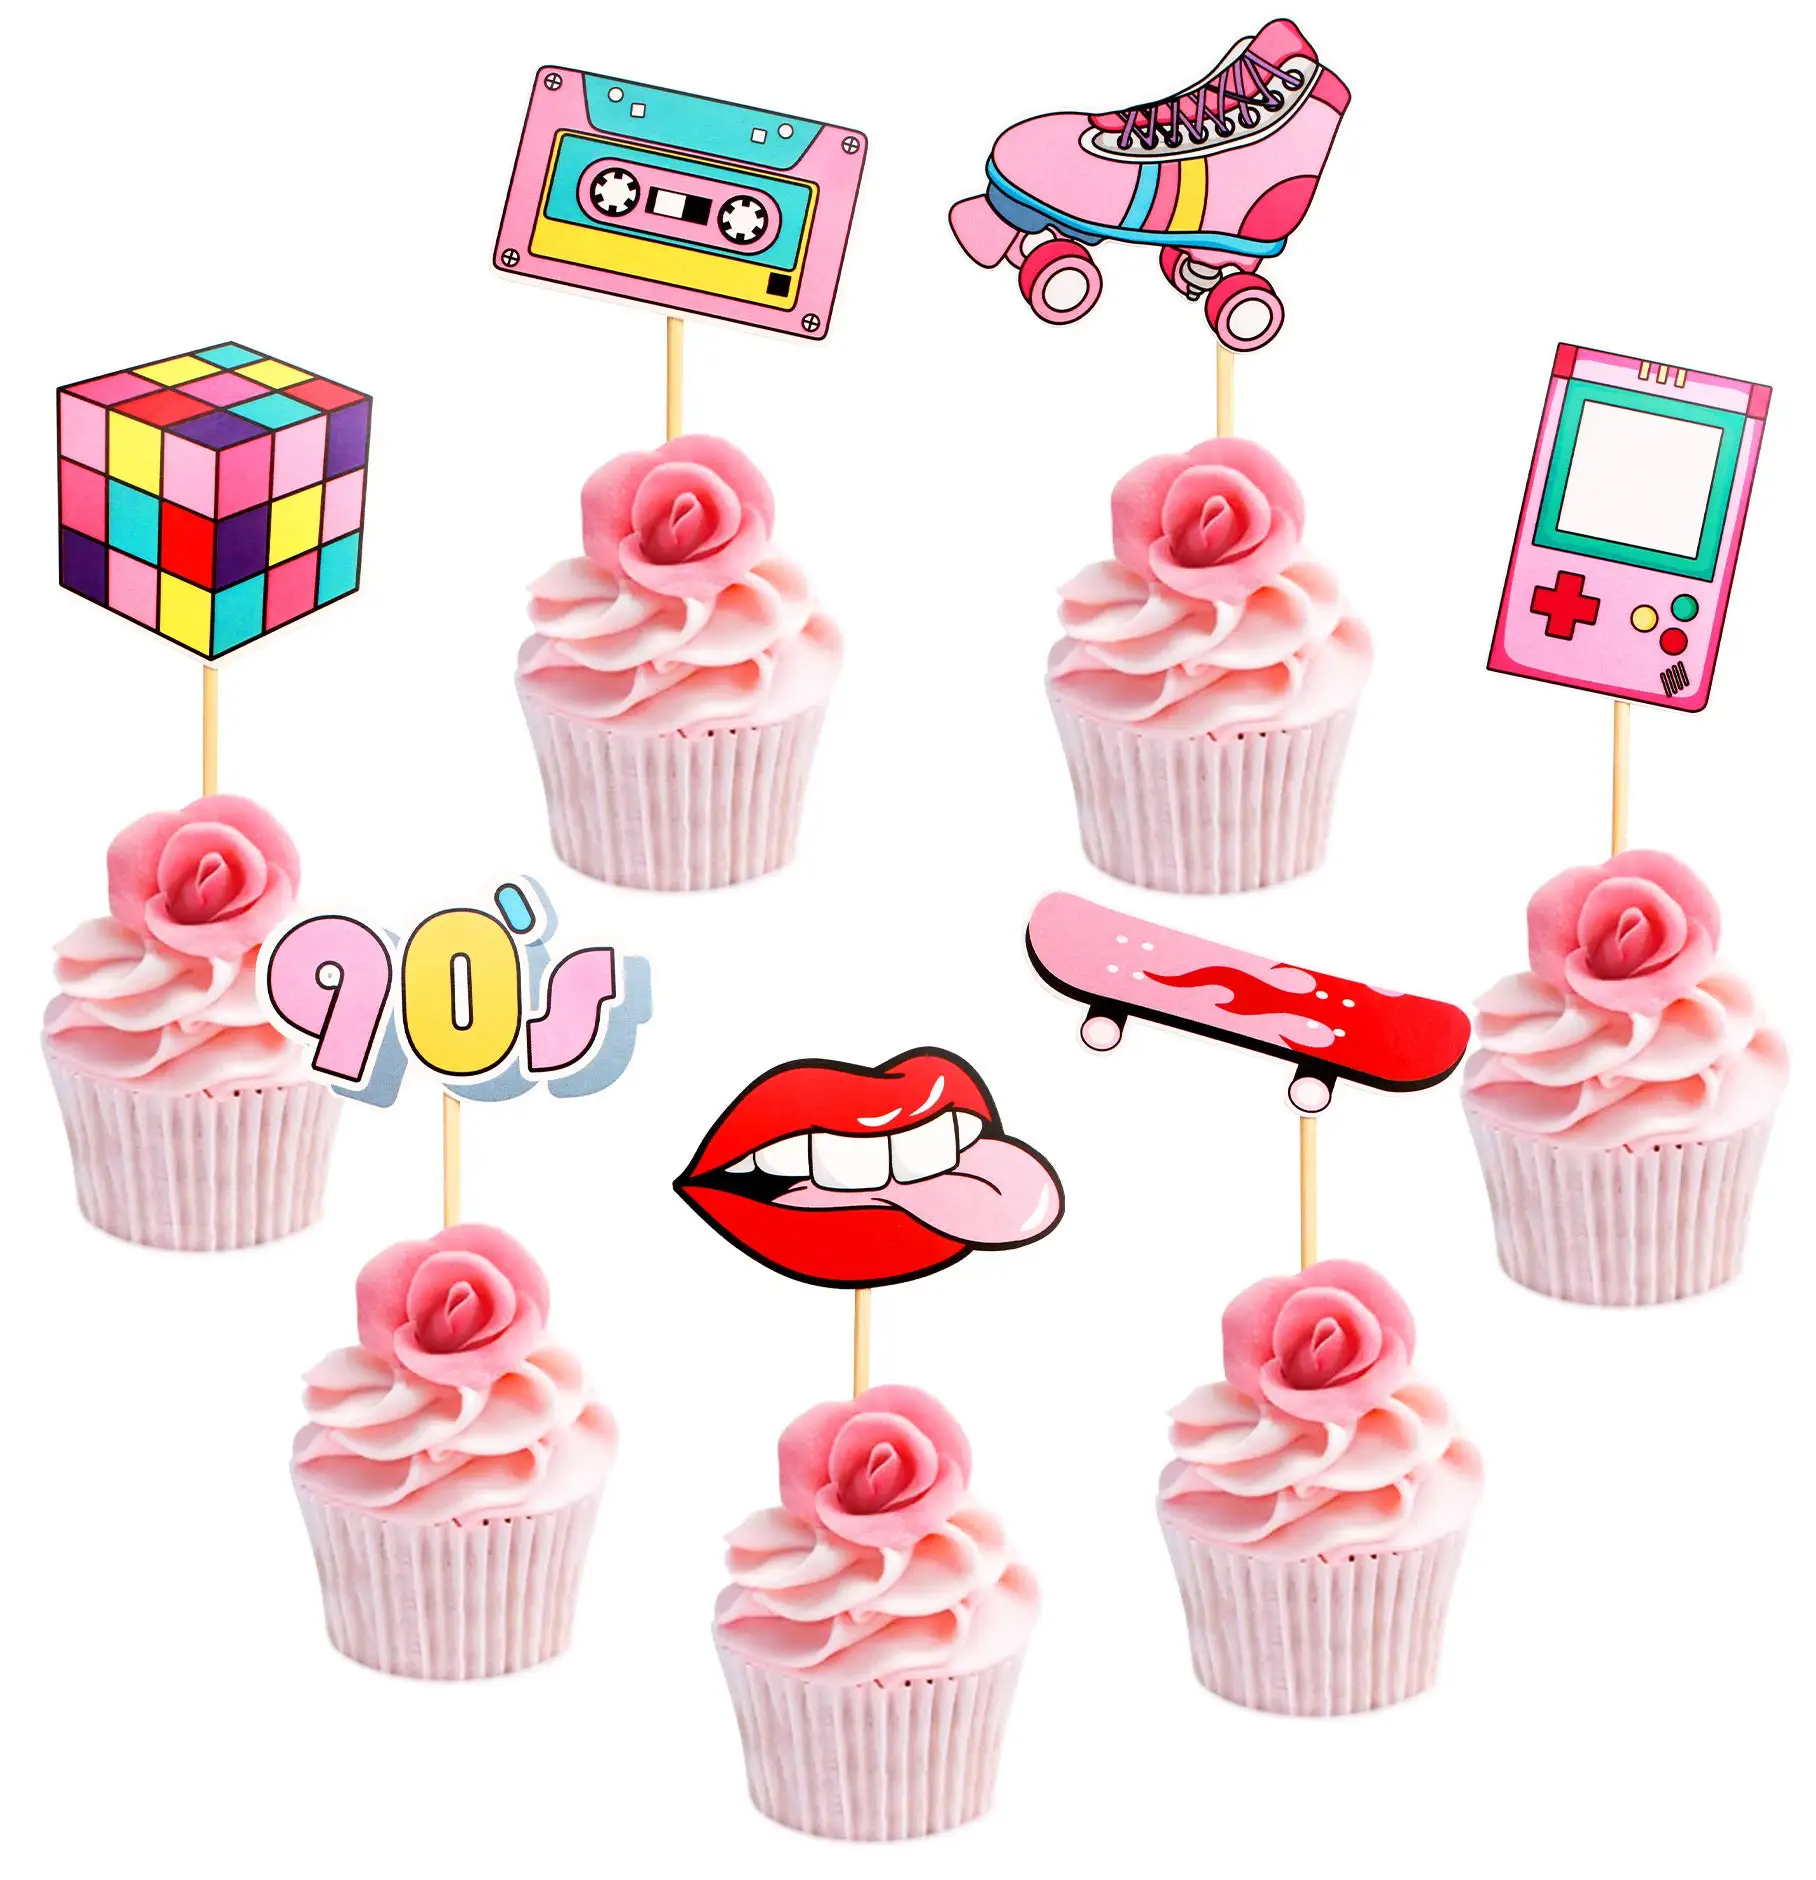 21Pcs 80s 90s Themed Cupcake Toppers Dessert Cupcake Toppers Birthday Supplies Throwback Party Favors Decorations safari party jungle animal birthday banner cake toppers cupcake decor happy birthday party decorations kids party favors boy